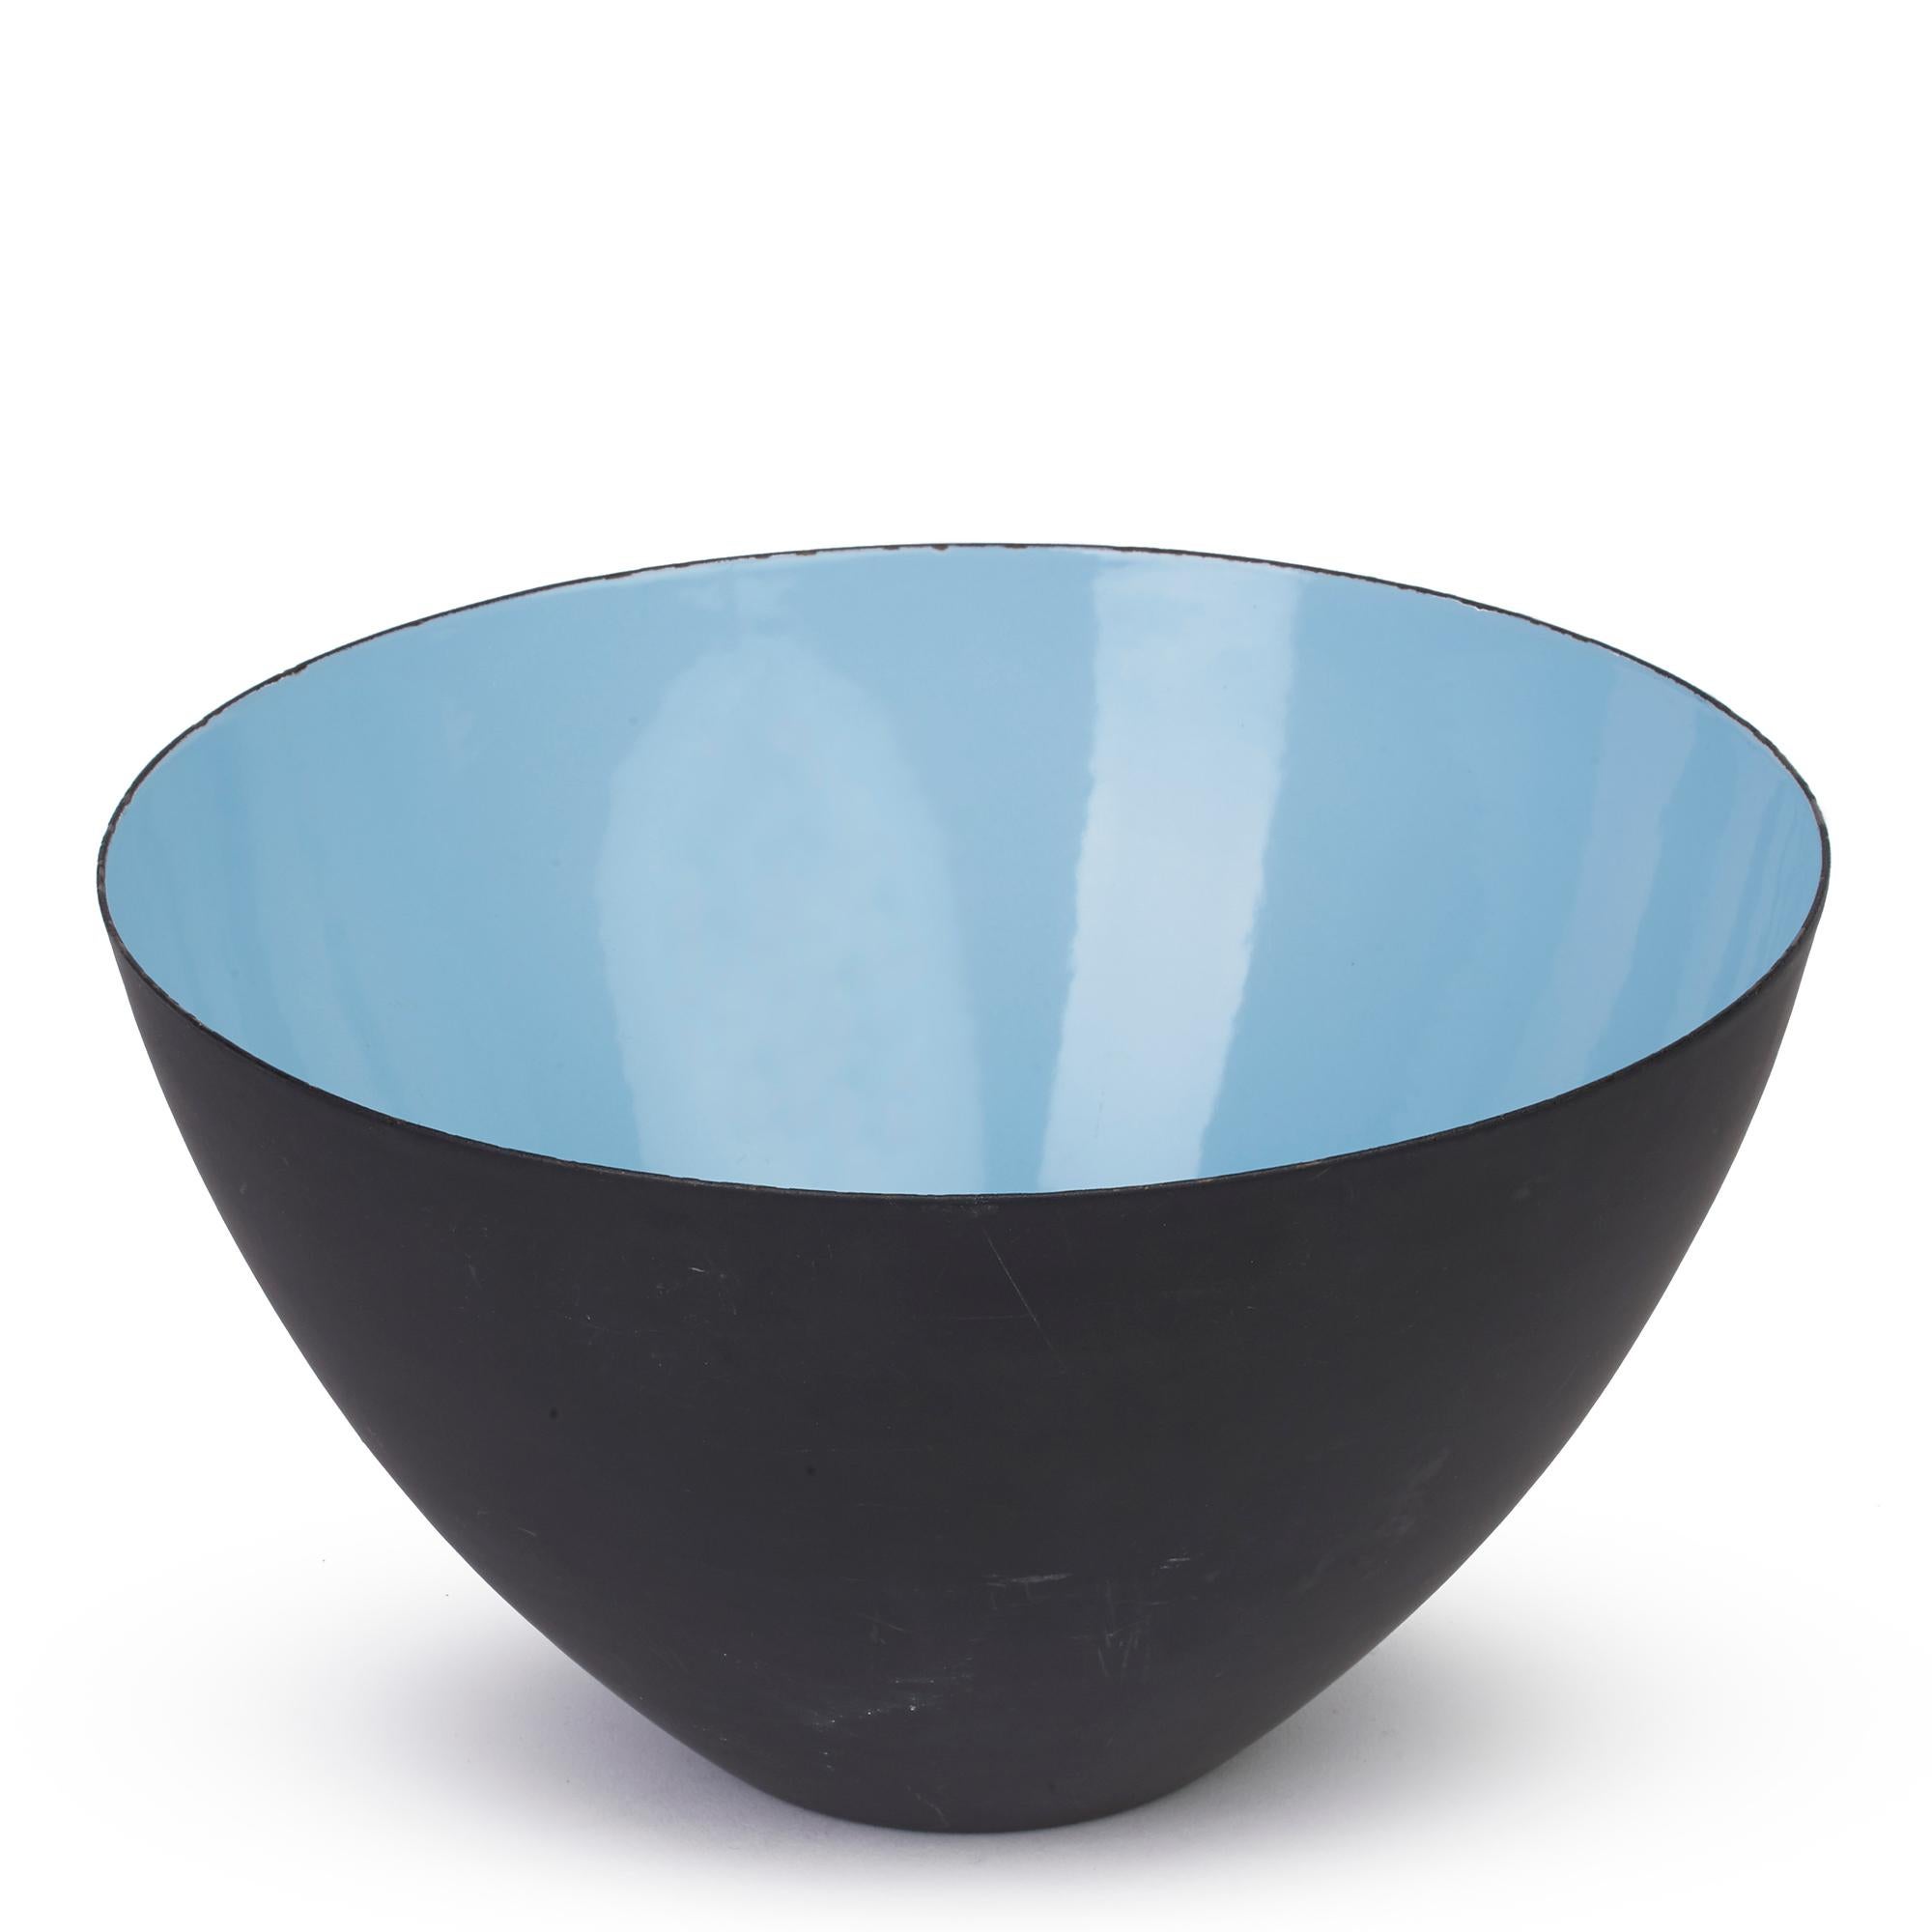 A stylish and large Danish Krenit Turquoise enameled black metal bowl designed by Herbert Krenchel and dating from the 1960's. The bowl stands on a narrow flat rounded foot and is of deep rounded form with the inner bowl decorated in bright